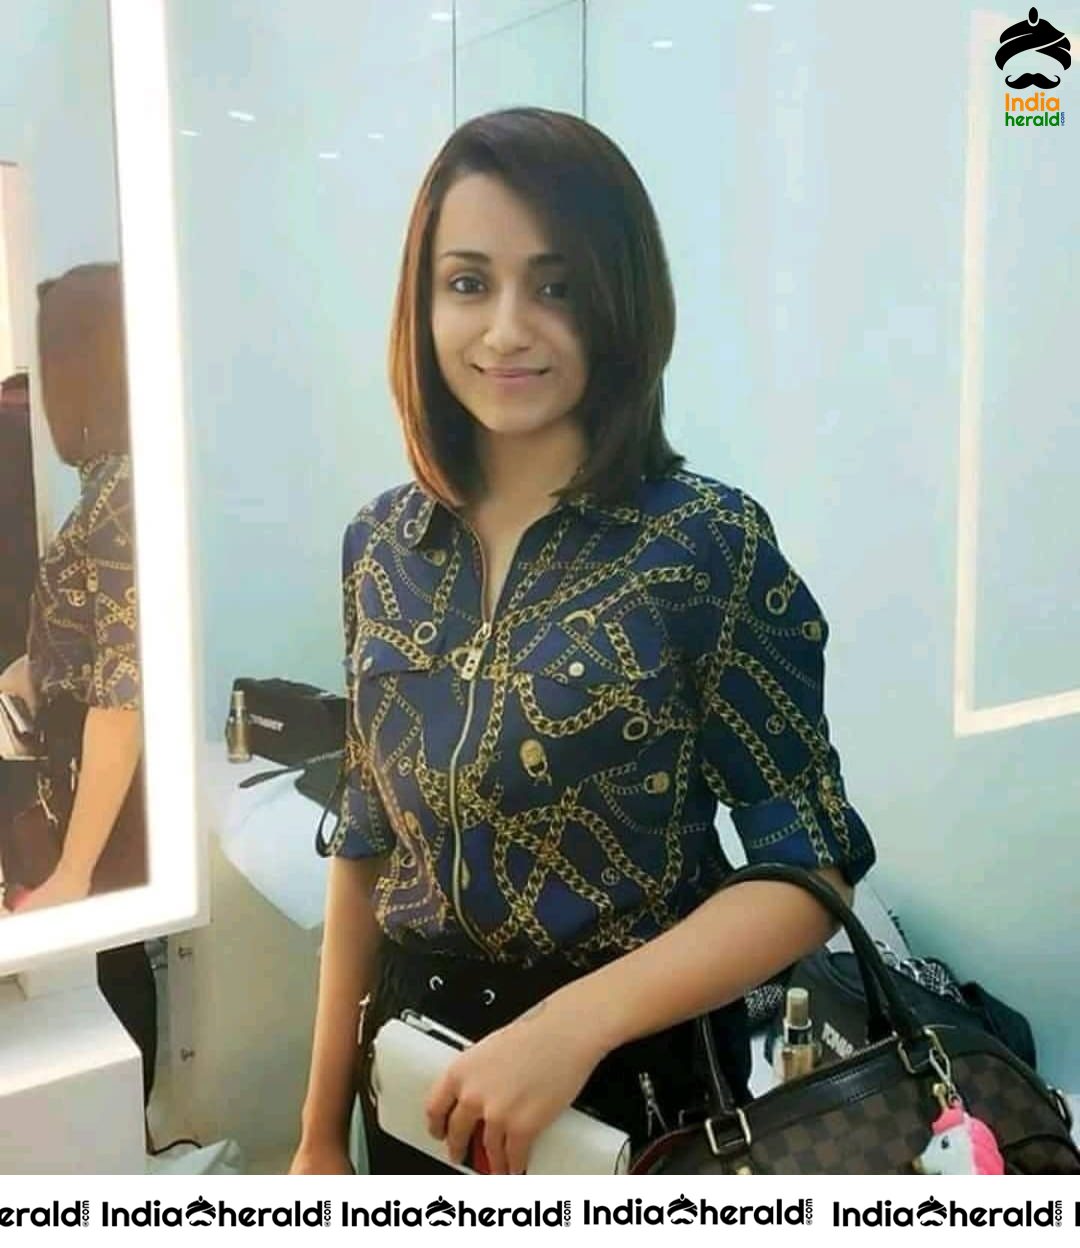 Trisha Latest Hot Personal Photos With Her Friends And family